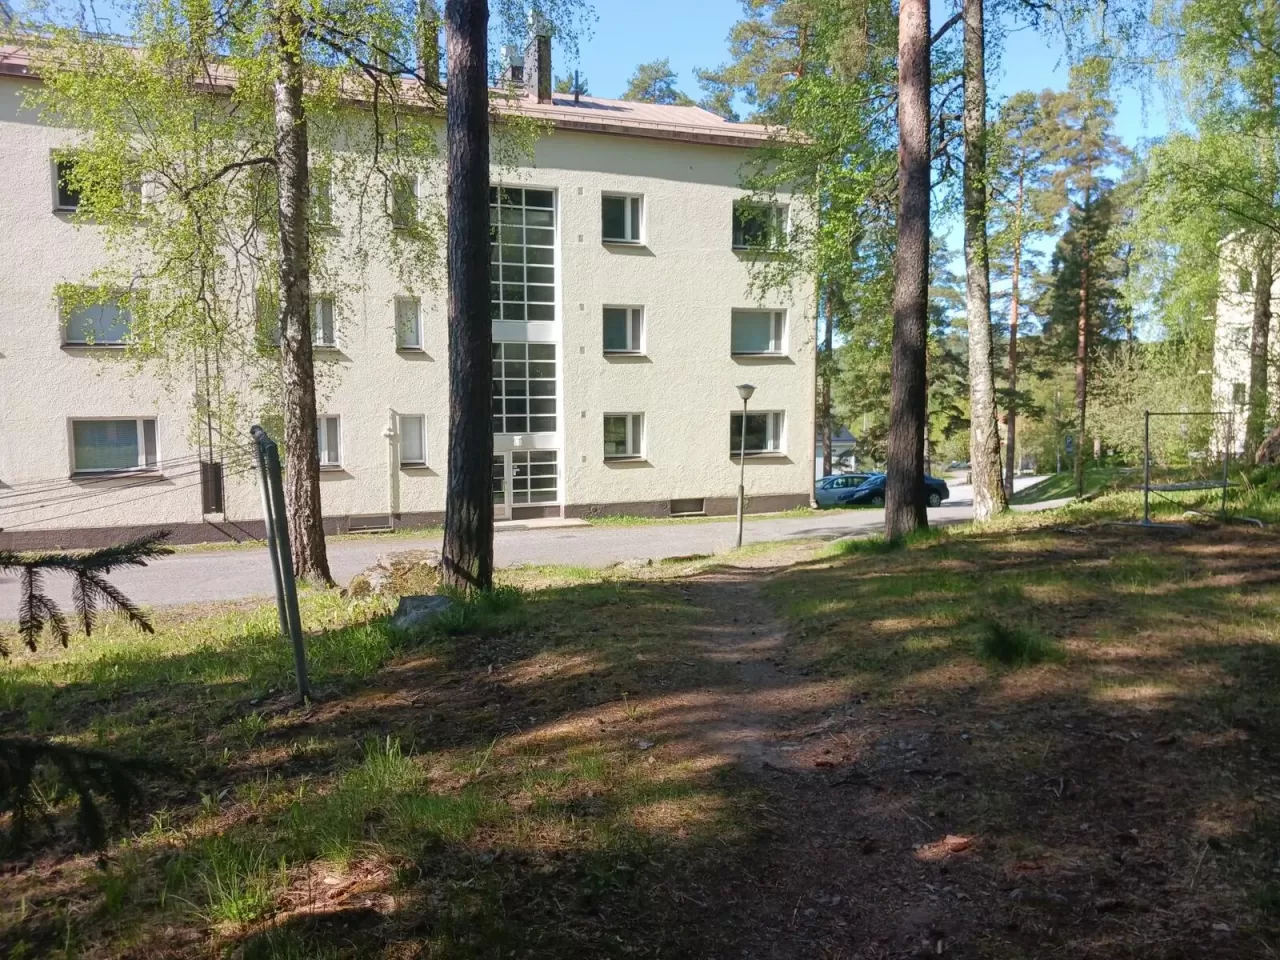 Flat in Nokia, Finland, 22 sq.m - picture 1